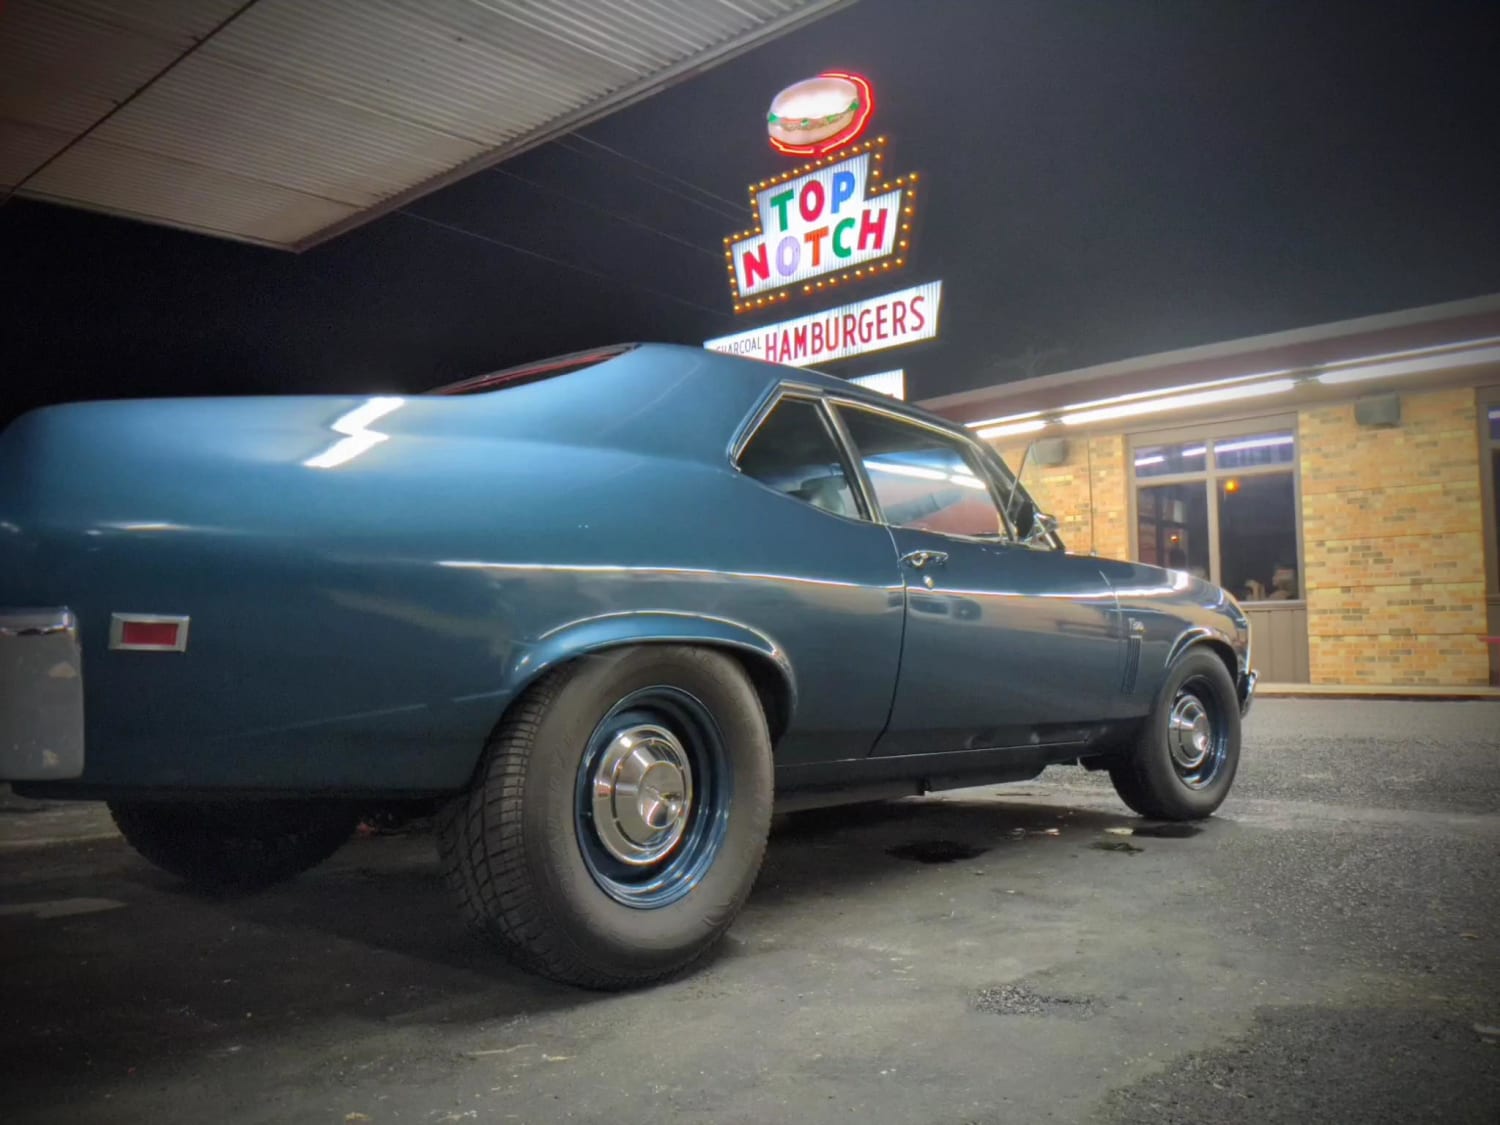 My buddy's 69 Nova at the same restaurant featured in Dazed and Confused.